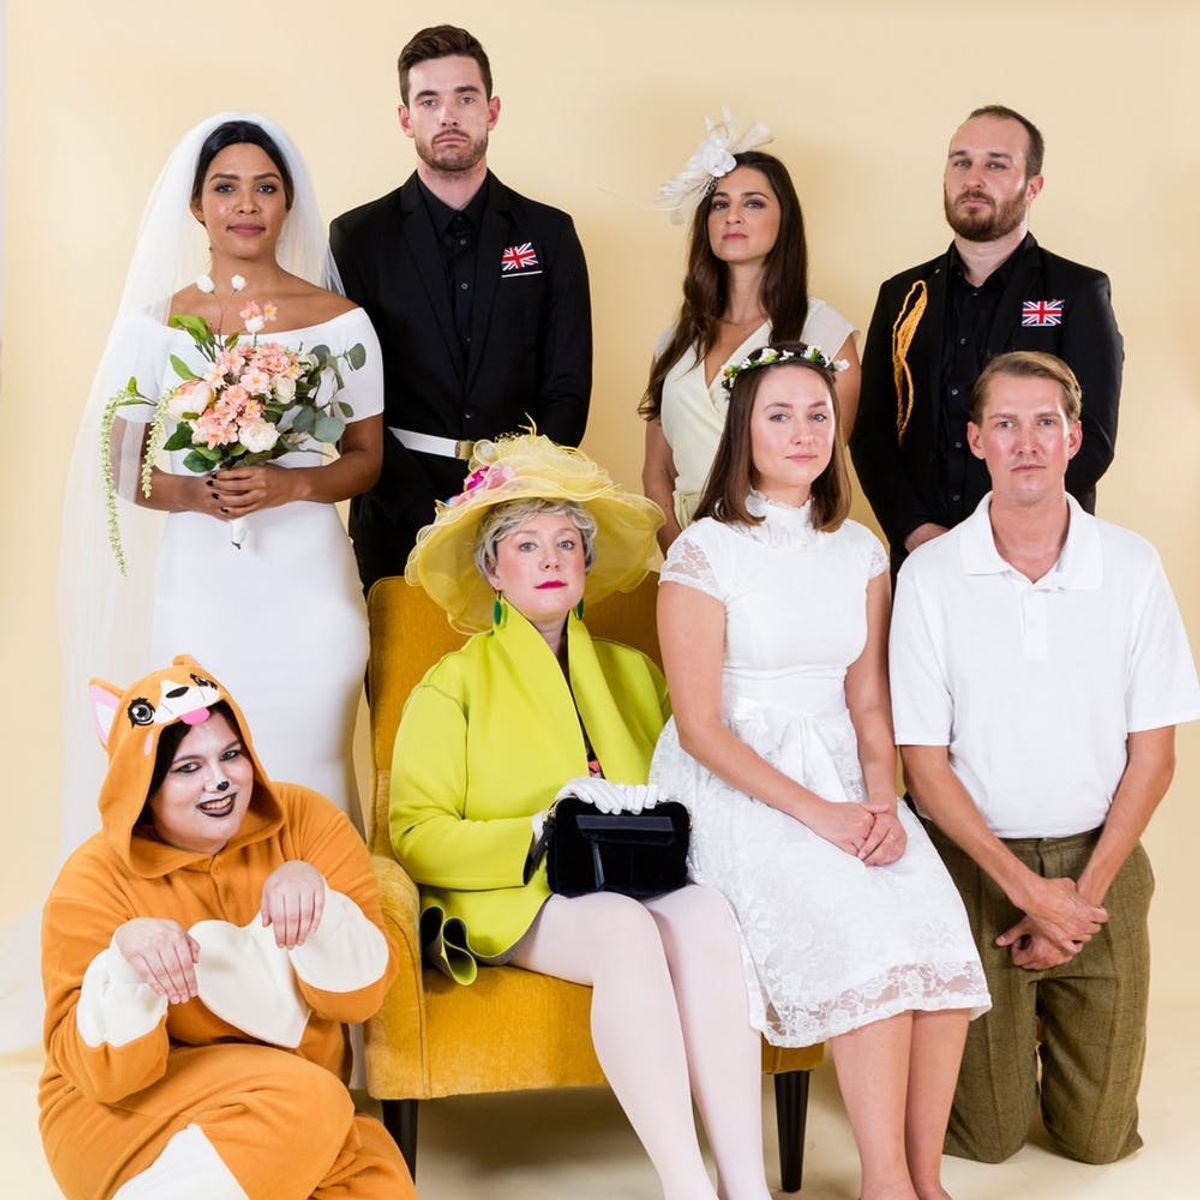 Live an IRL Fairytale With This Royal Wedding Group Halloween Costume